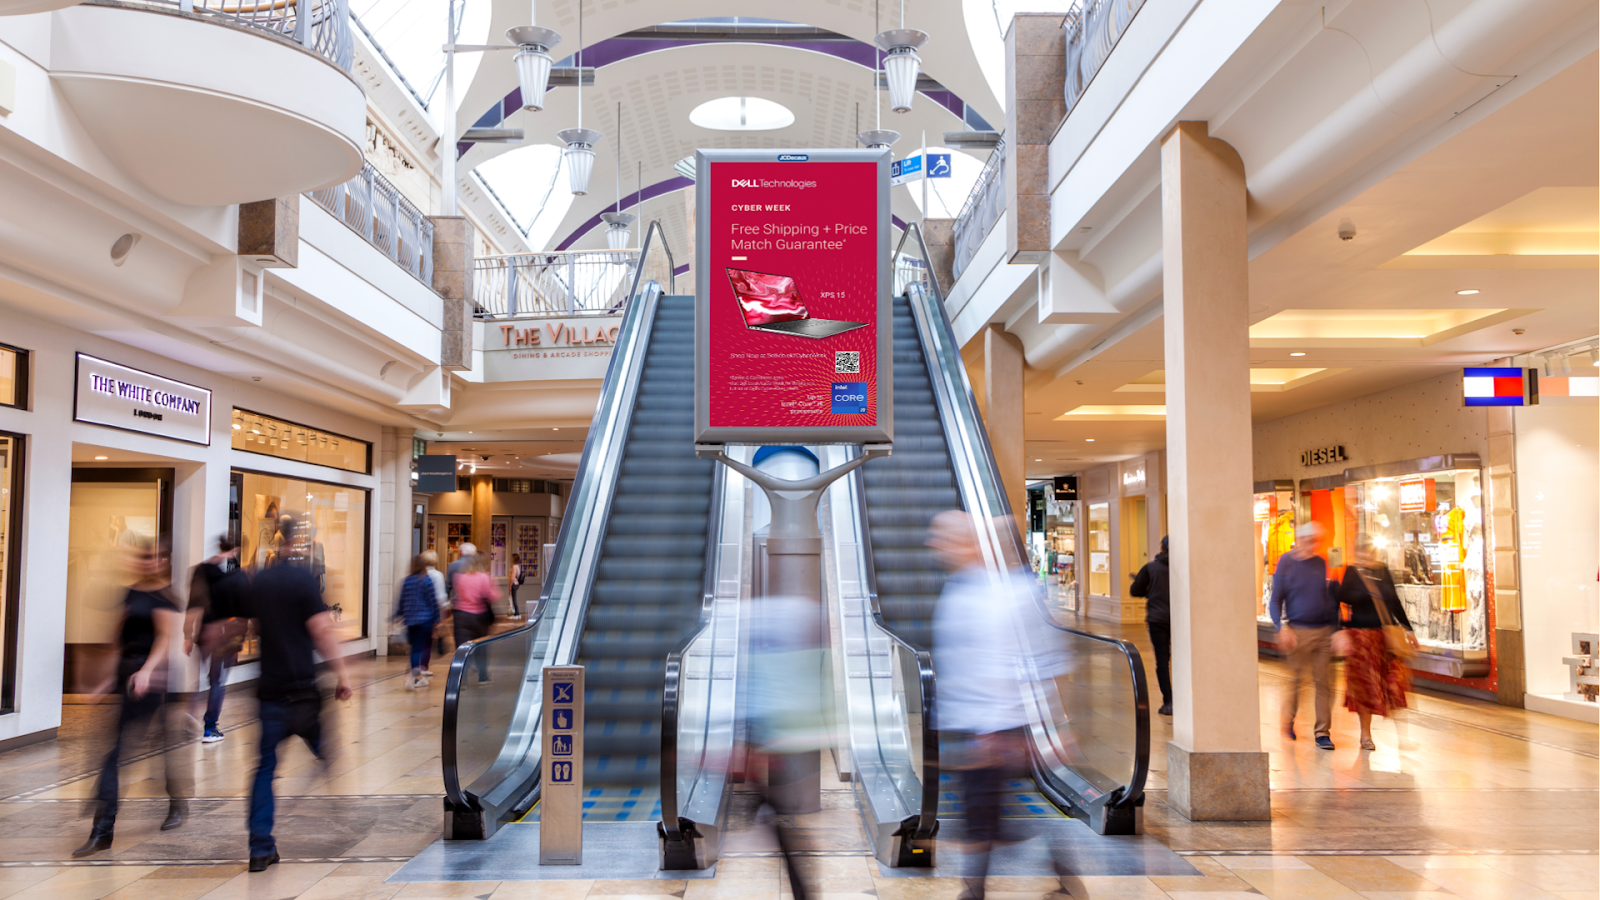 Pictures of a DOOH screen in a mall for a pDOOH ad campaign for Dell